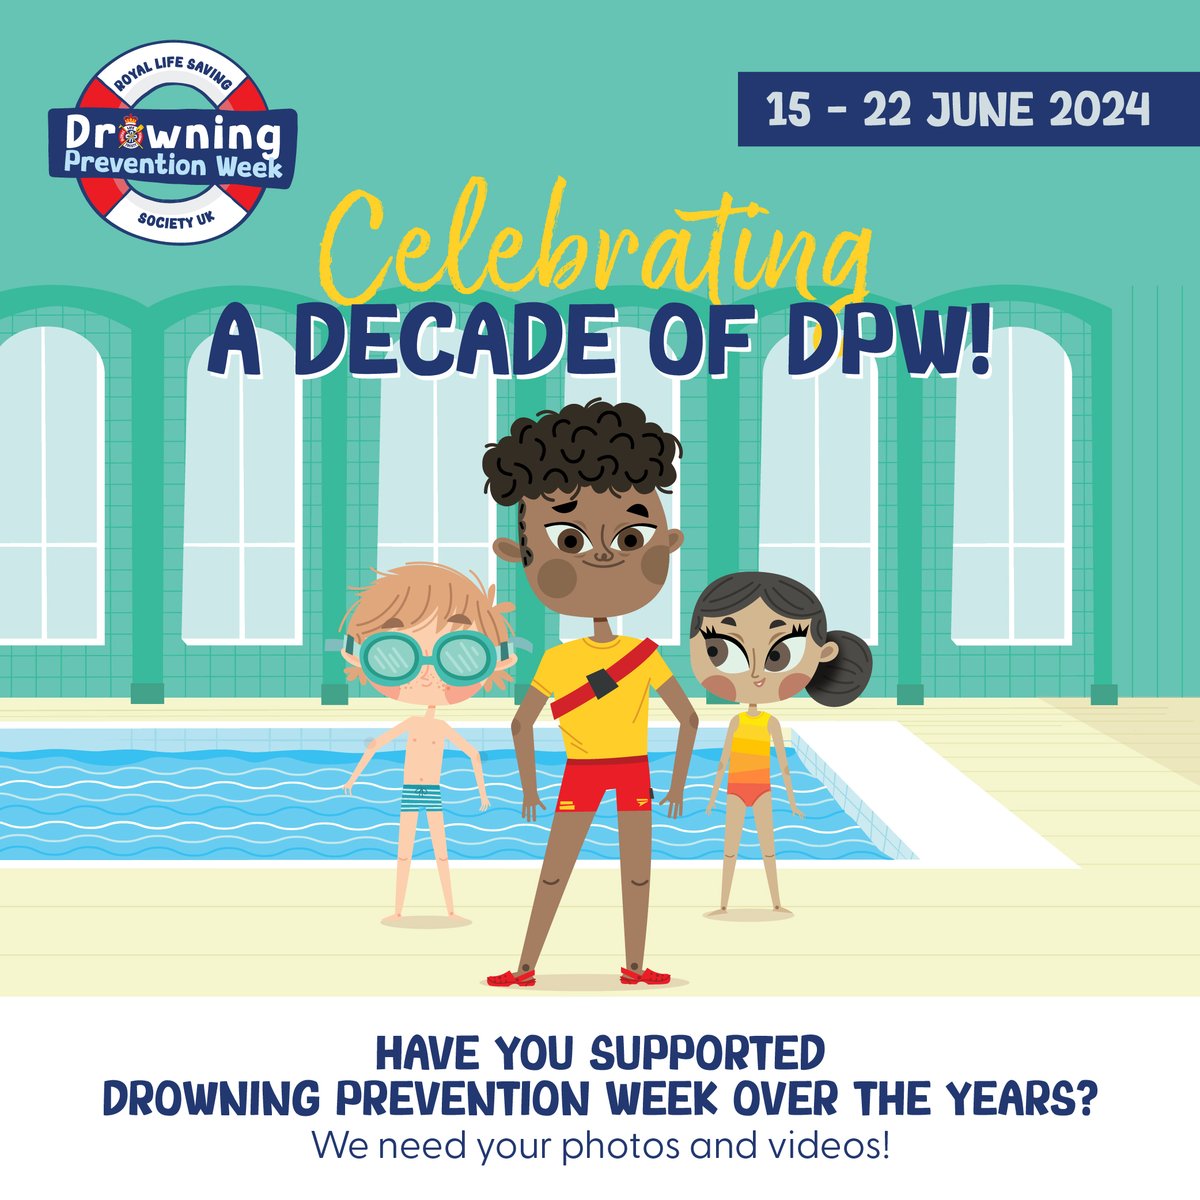 Planning is ramping up for Drowning Prevention Week 2024 & as we enter our second decade of DPW, we'd love to showcase your support from the last 10 yrs! 🌟 If you have any photos/videos that you'd be happy for us to share, please email marketing@rlss.org.uk ✉️ THANK YOU! 👍